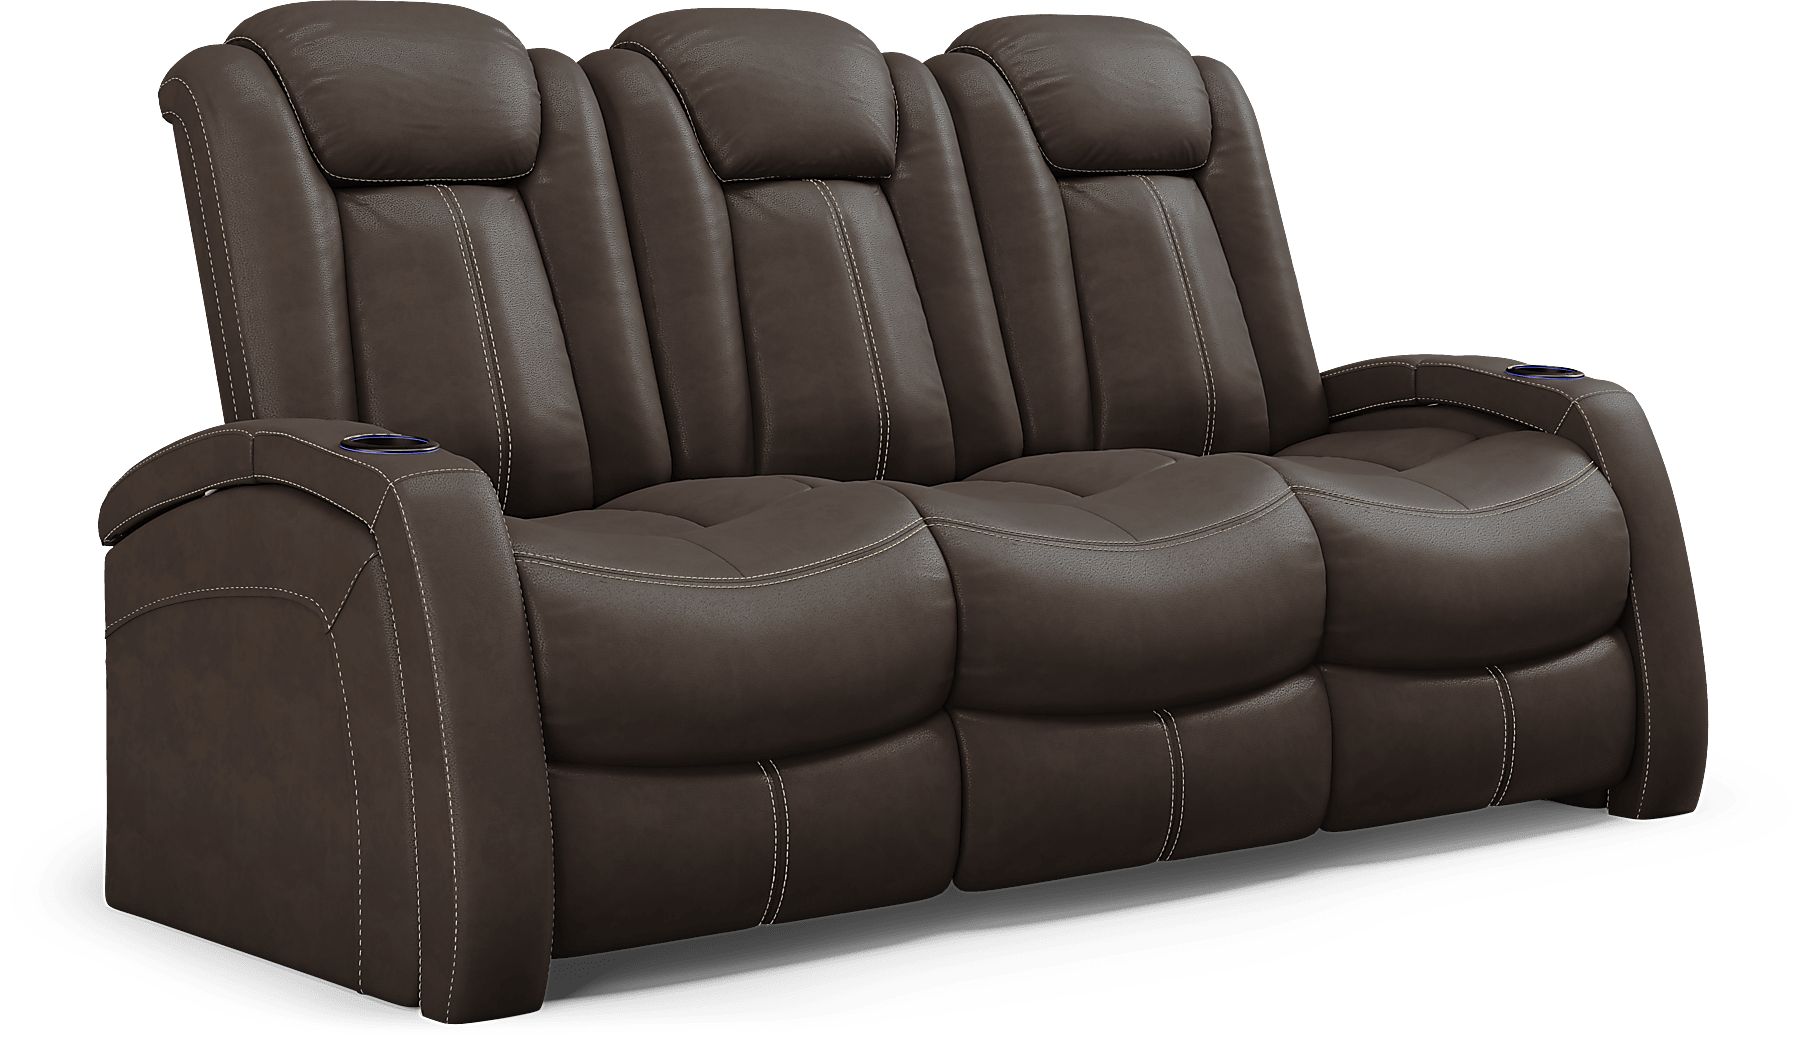 Crestline Brown 7 Pc Living Room with Dual Power Reclining Sofa